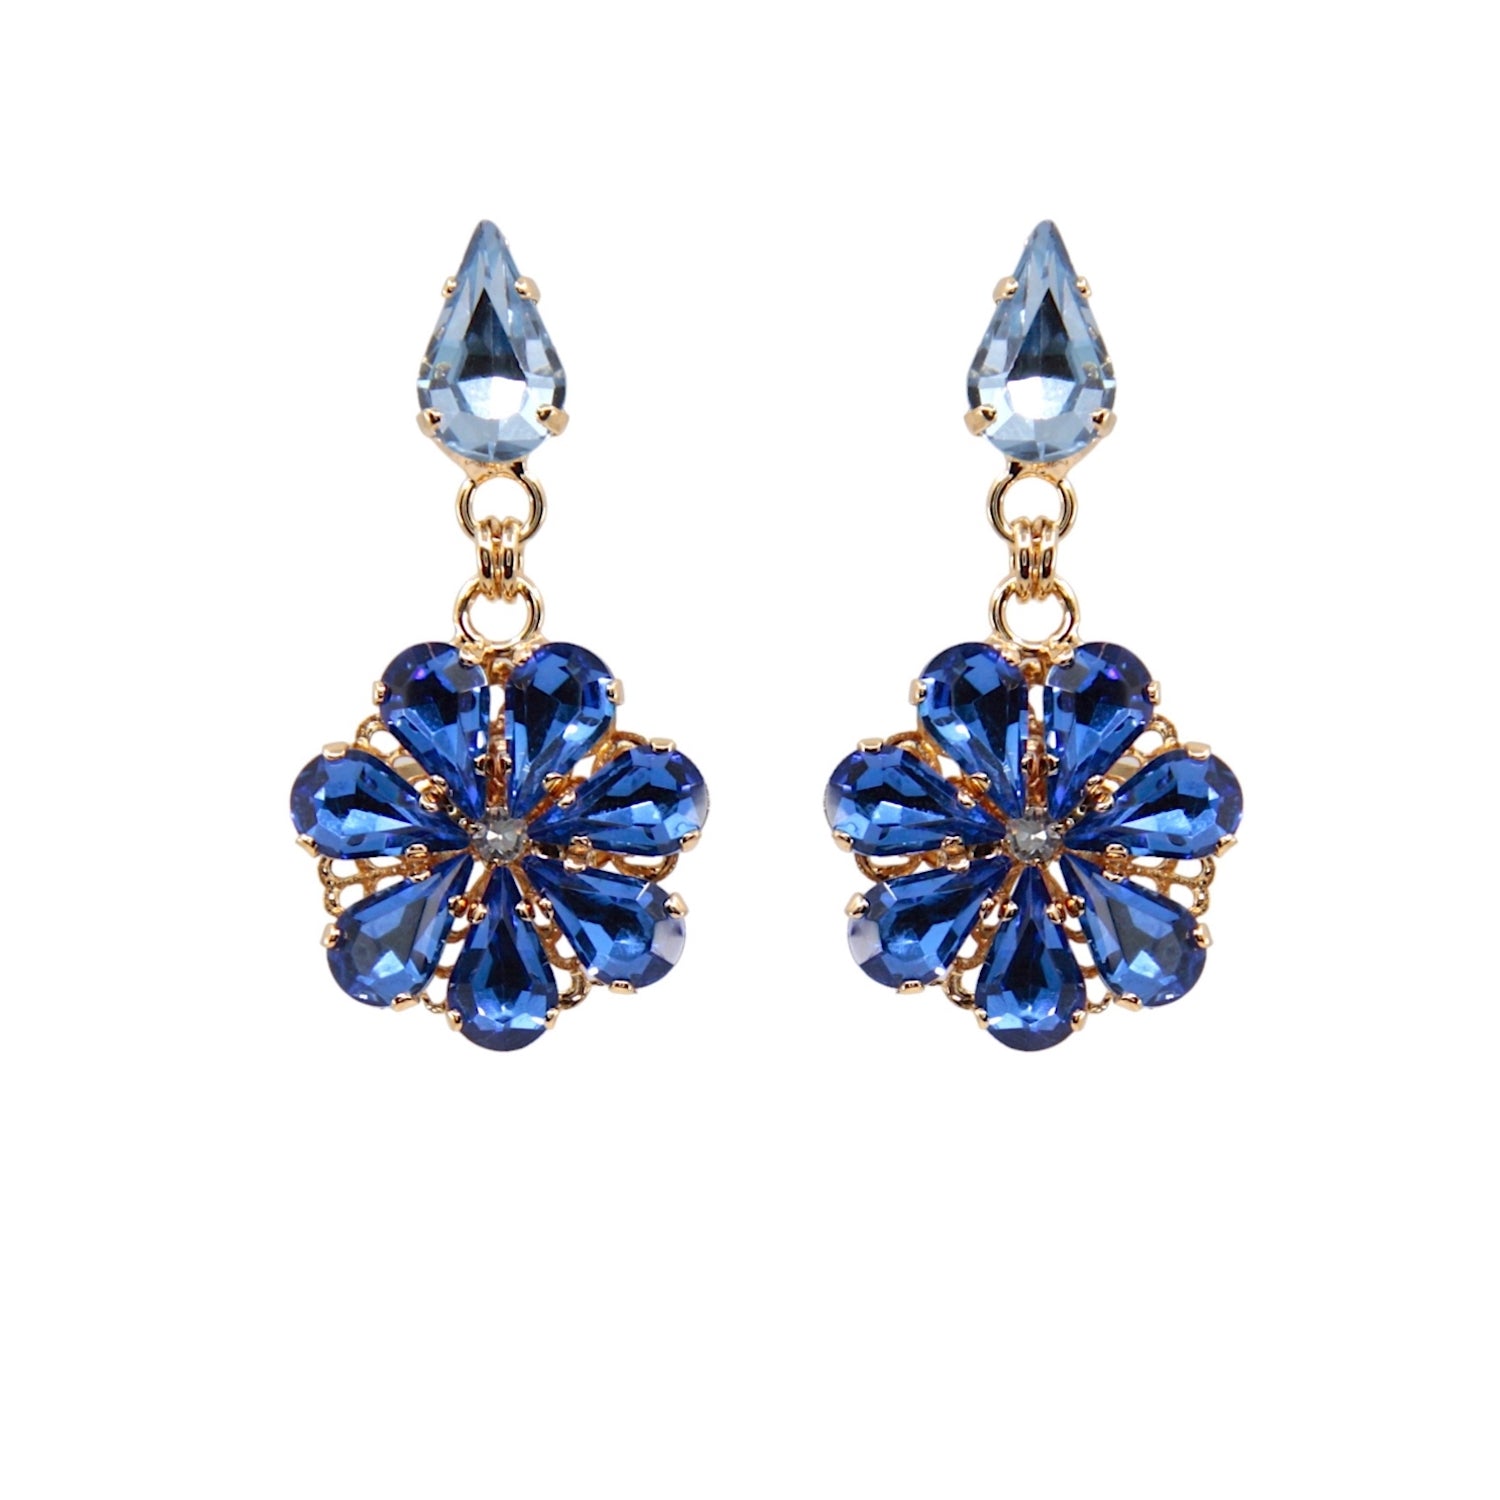 Daisy Pendant Earrings With Sapphire And Aquamarine Crystal Drops